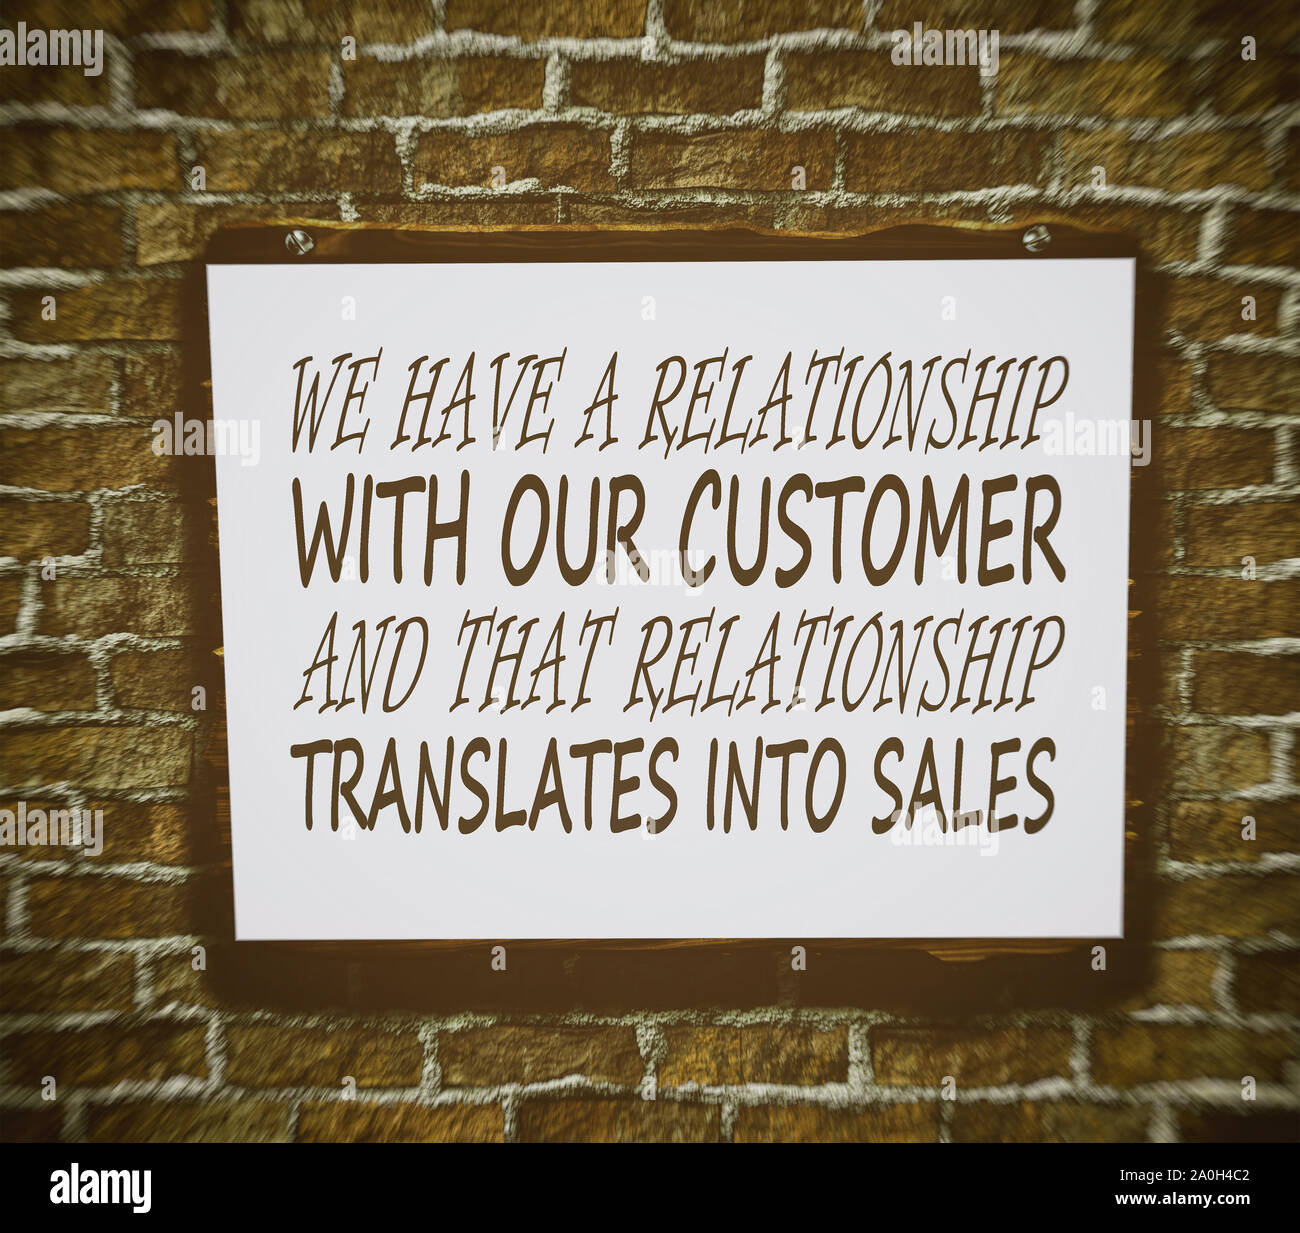 We have a relationship with our customer, and that relationship ...